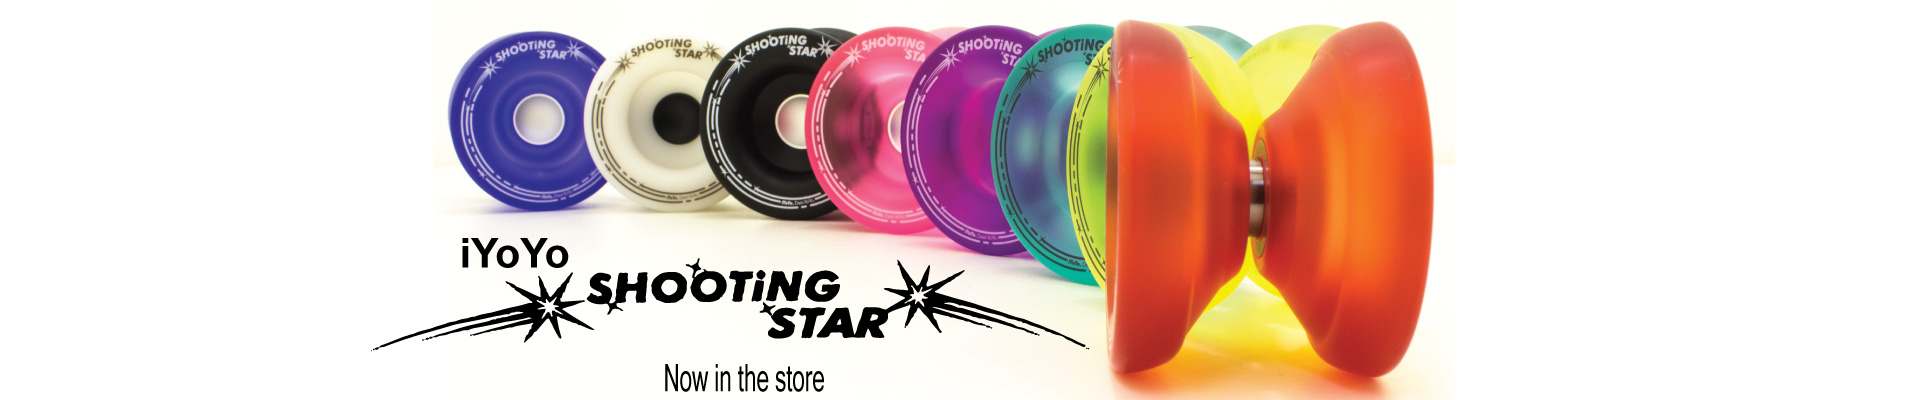 The iYoYo SHOOTiNG STAR is now in the store